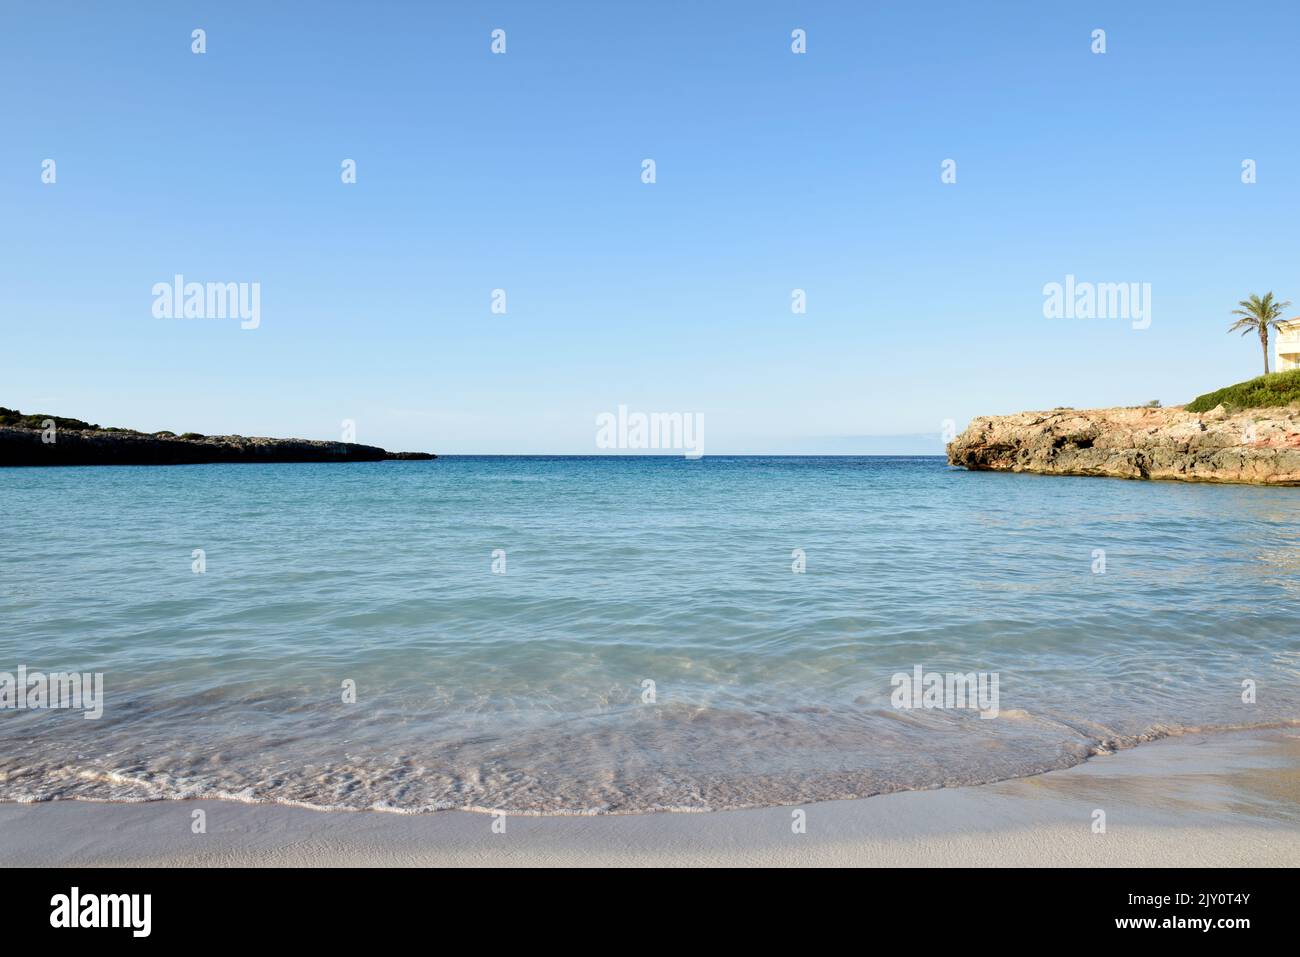 Sea shore at a tropical beach with clear ocean water and sand Stock Photo